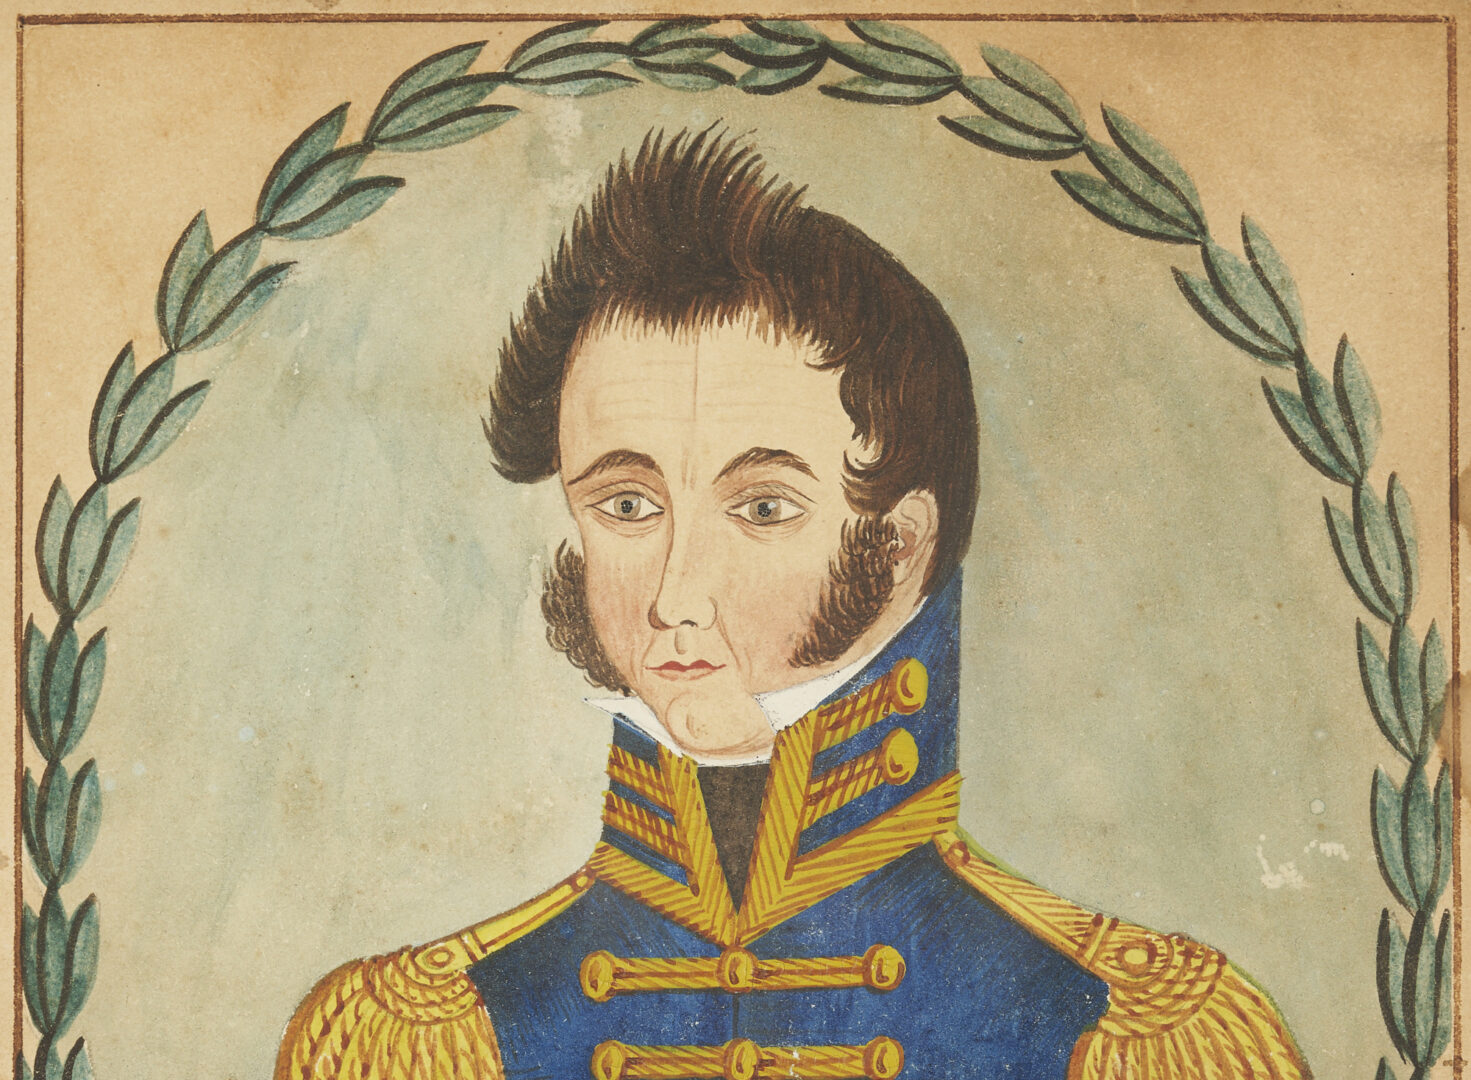 Lot 537: Watercolor of Captain Lawrence of The USS Chesapeake in Military Uniform, 19th C.